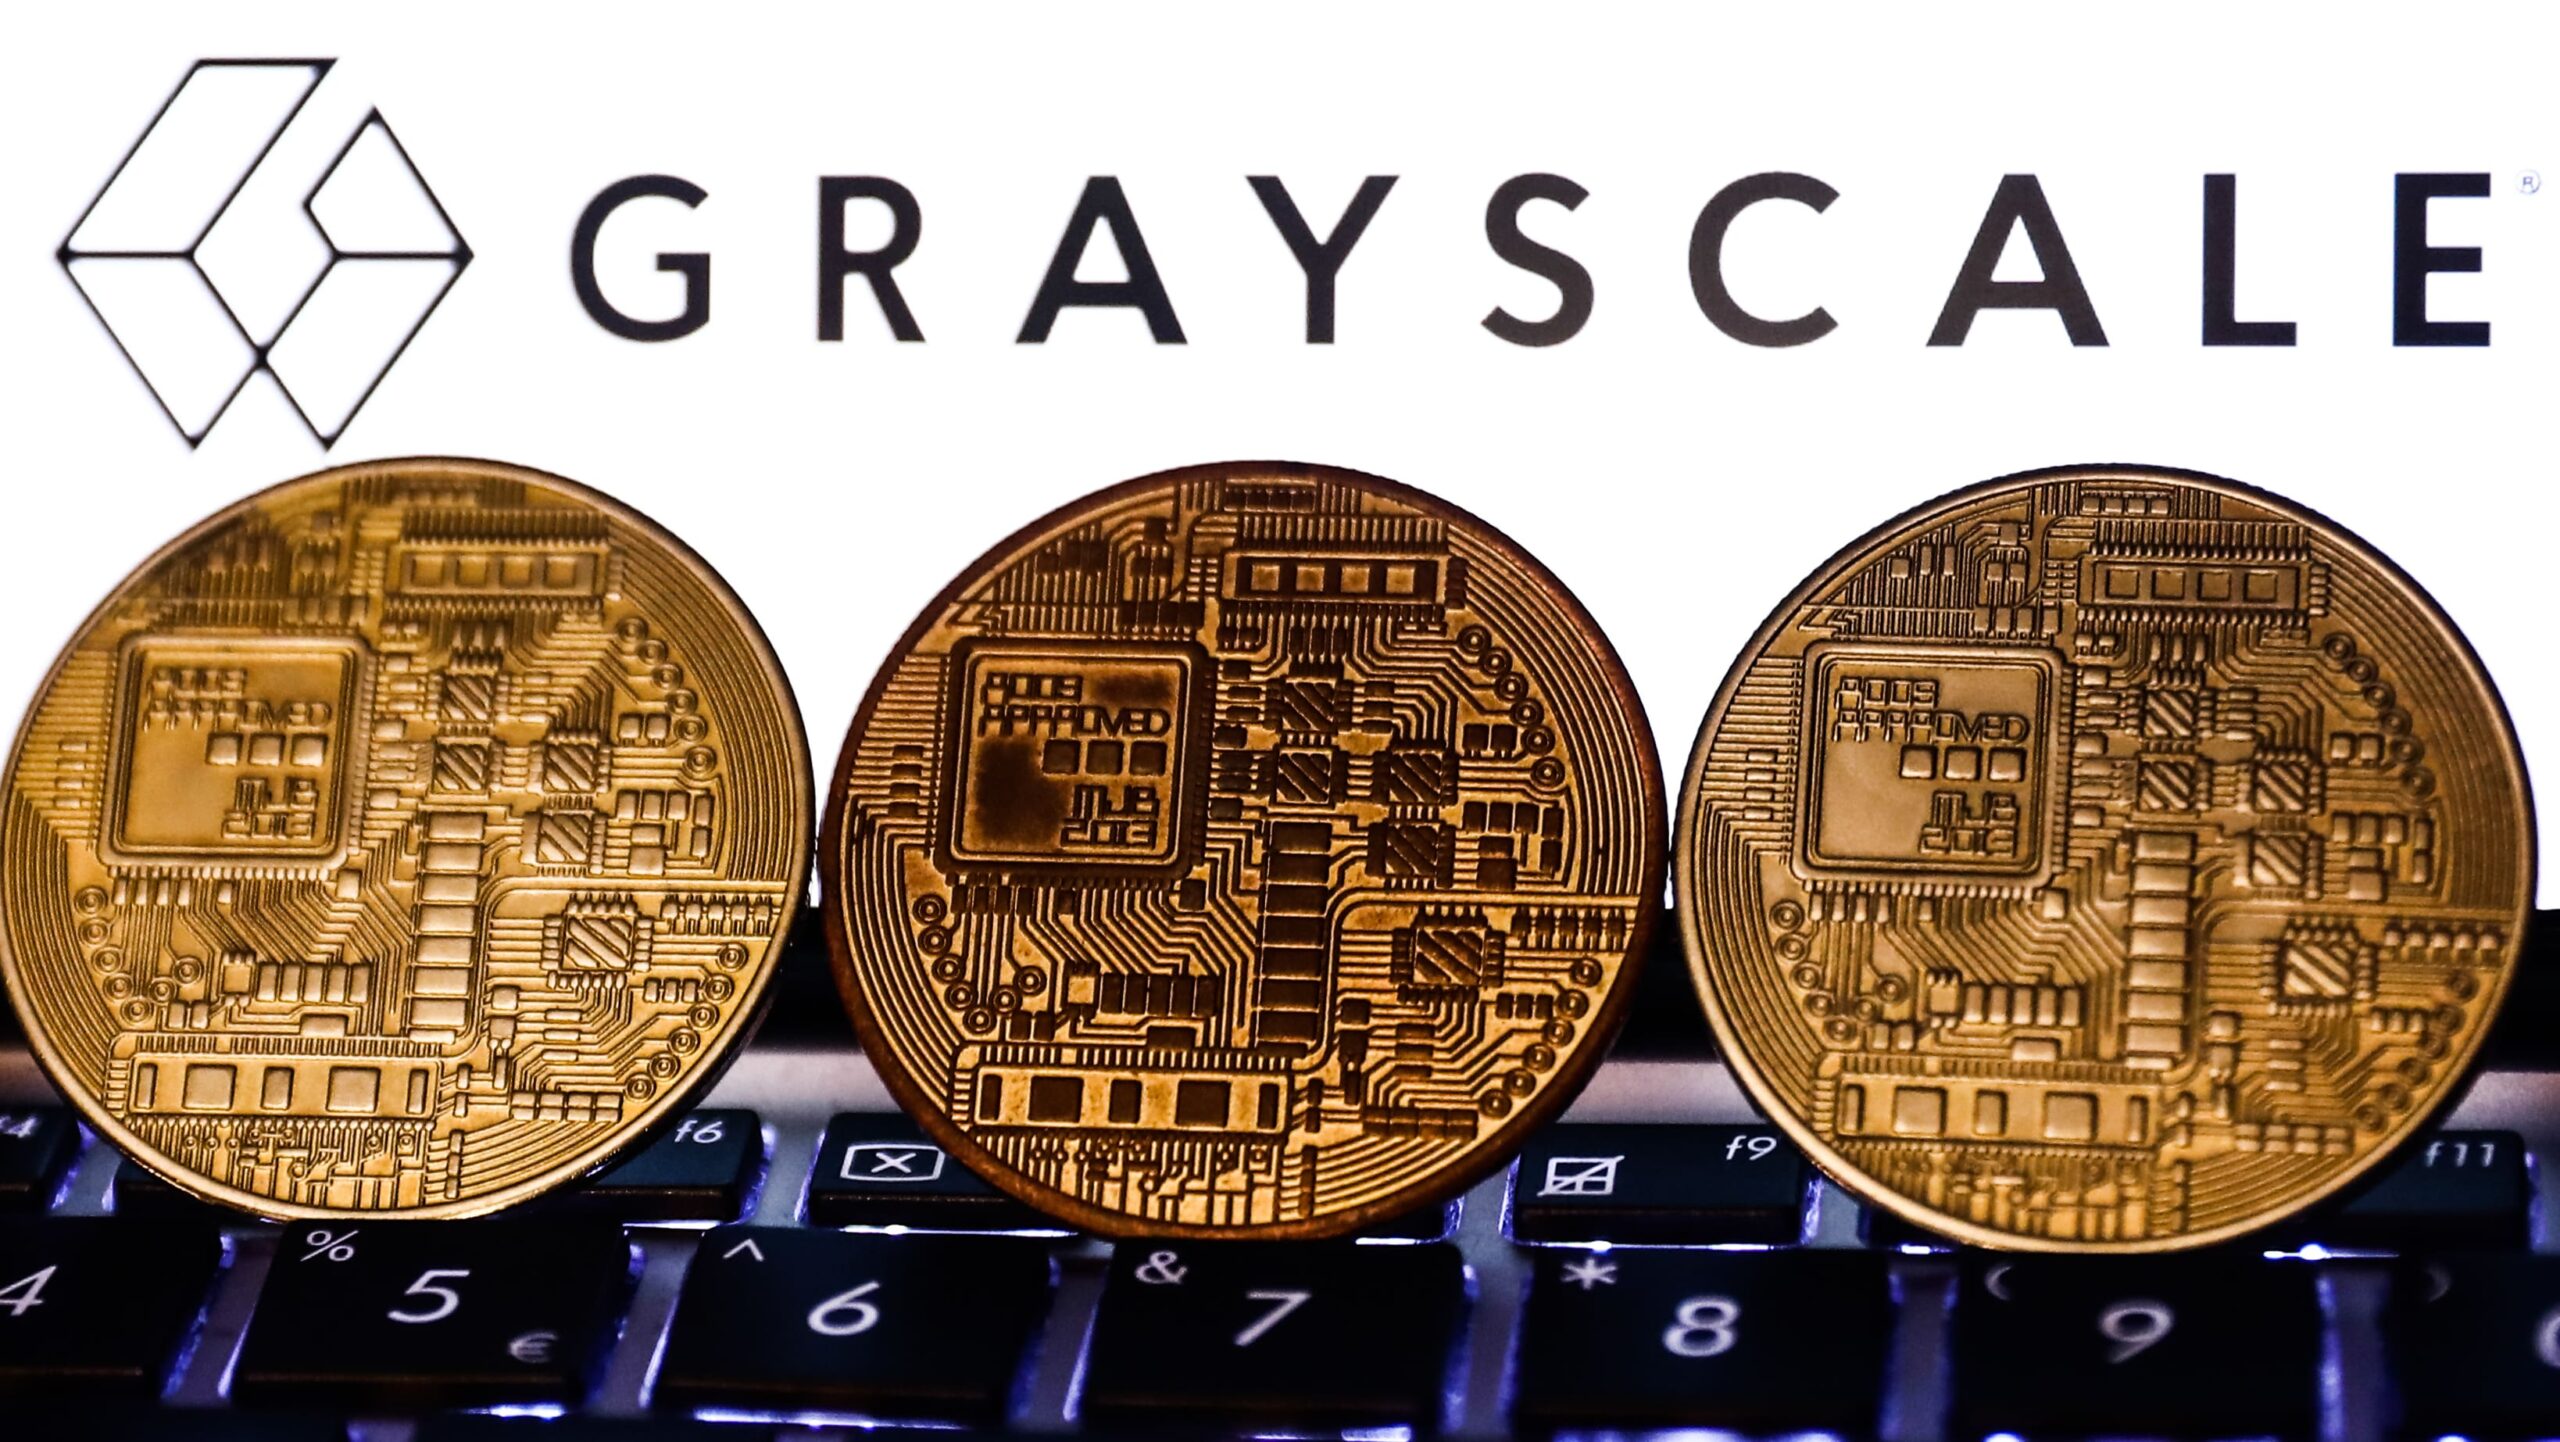 Grayscale's BTC Holdings: Second-Largest Player With $16 Billion